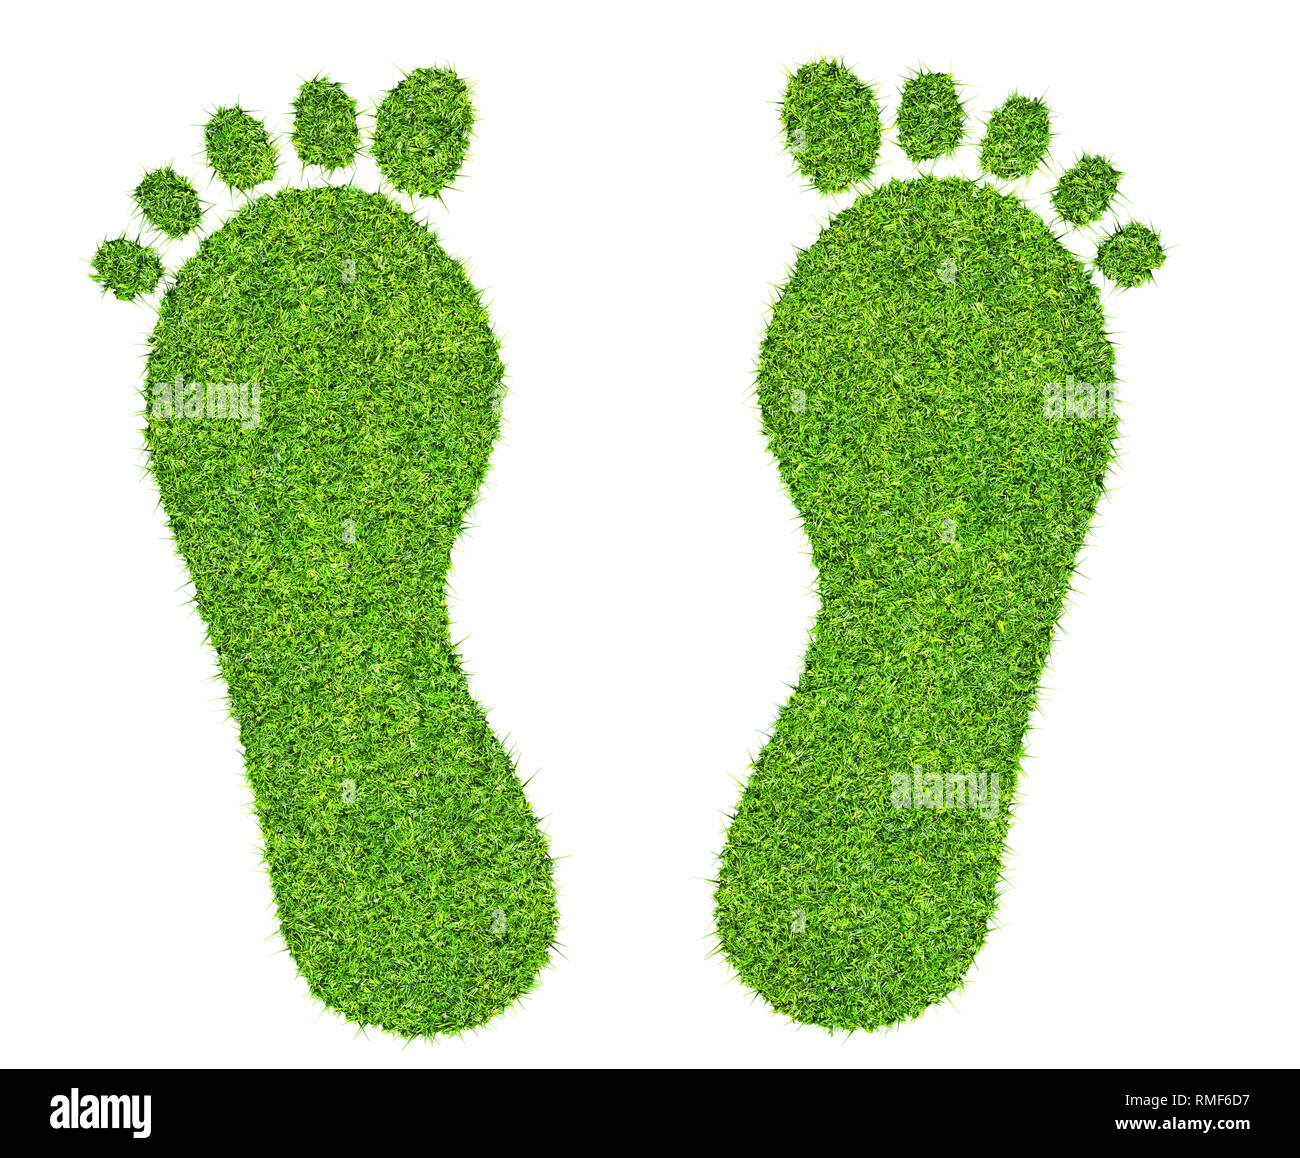 Foot print made of green grass isolated Banque D'Images